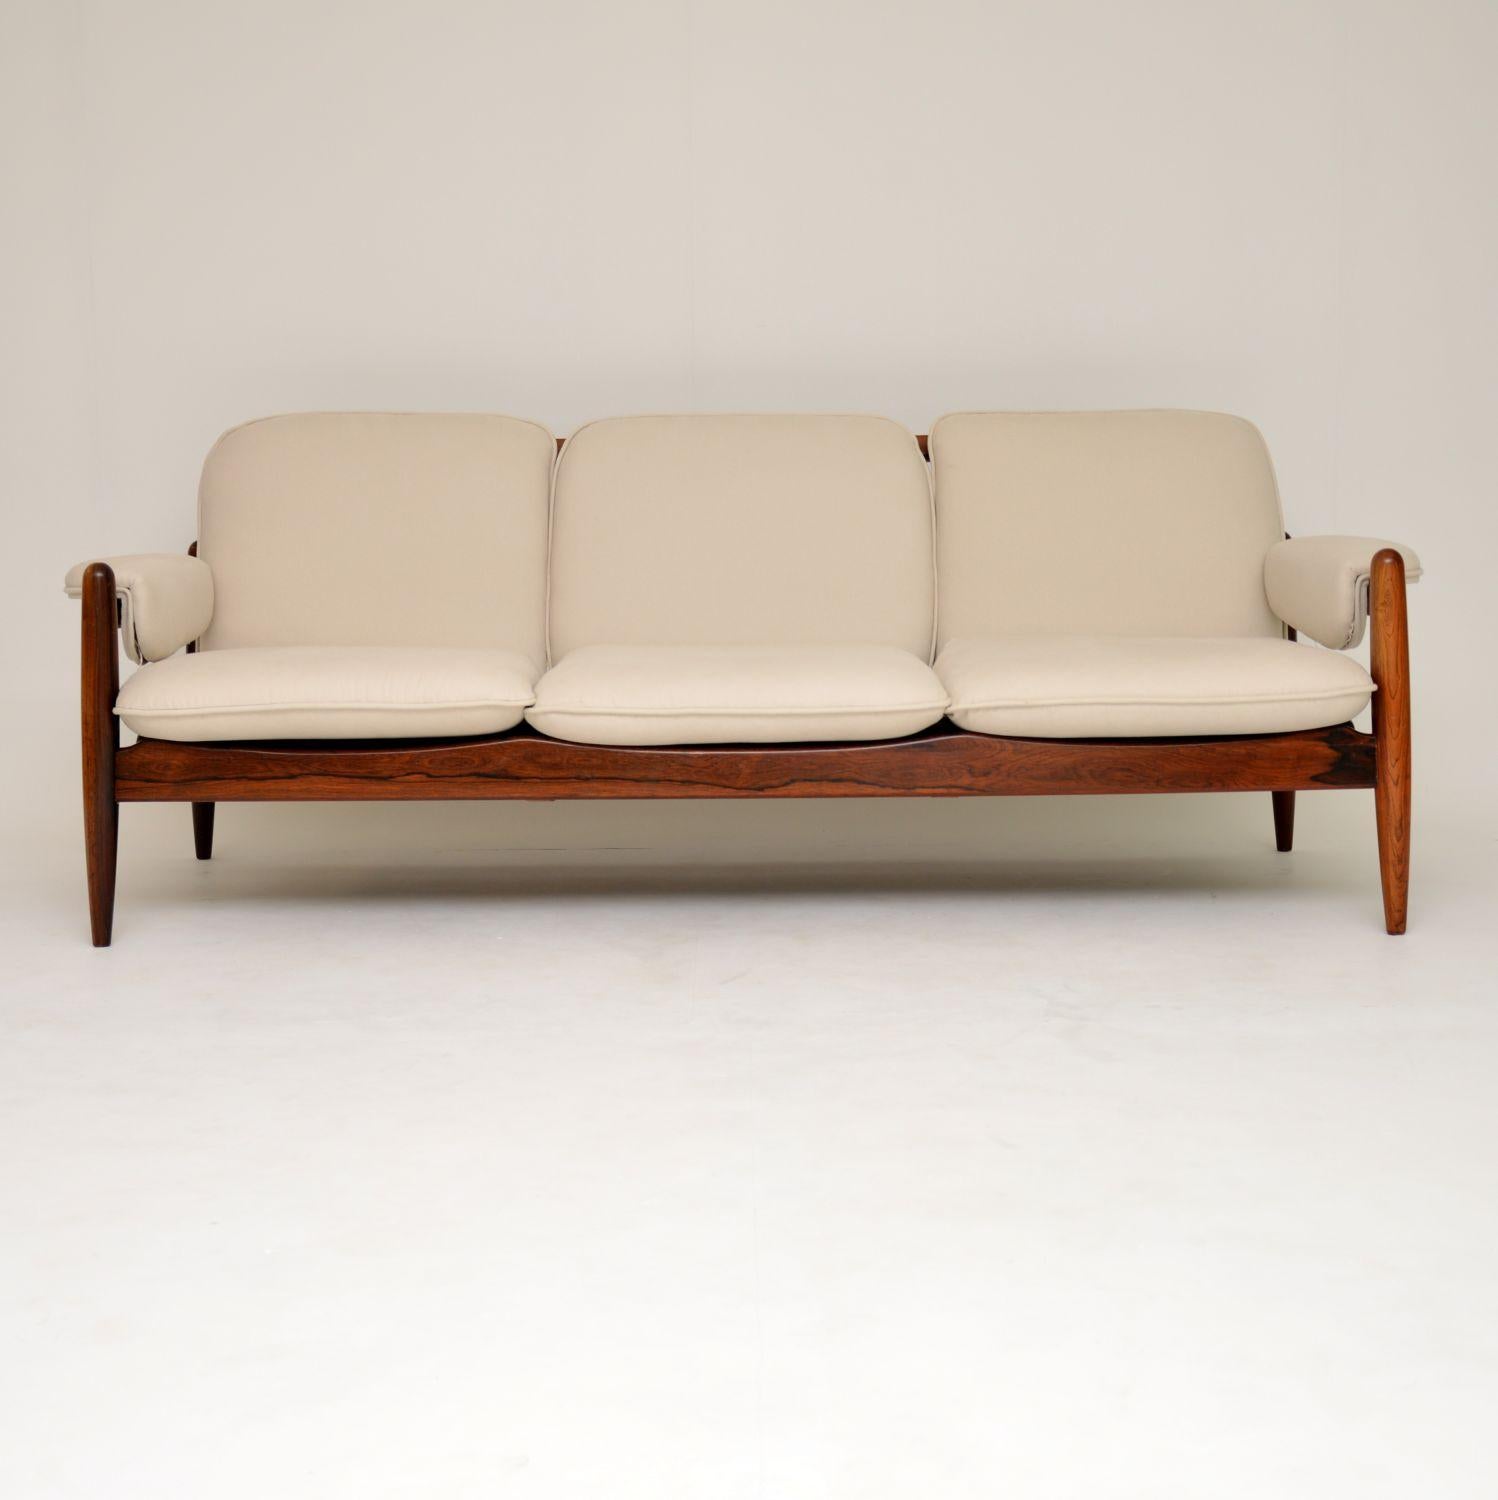 A stunning and top quality Danish vintage sofa, this dates from the 1960s. It is of superb quality, with a gorgeous design and beautiful wood grain patterns throughout. It’s very comfortable, and is in great condition for its age. We have had this